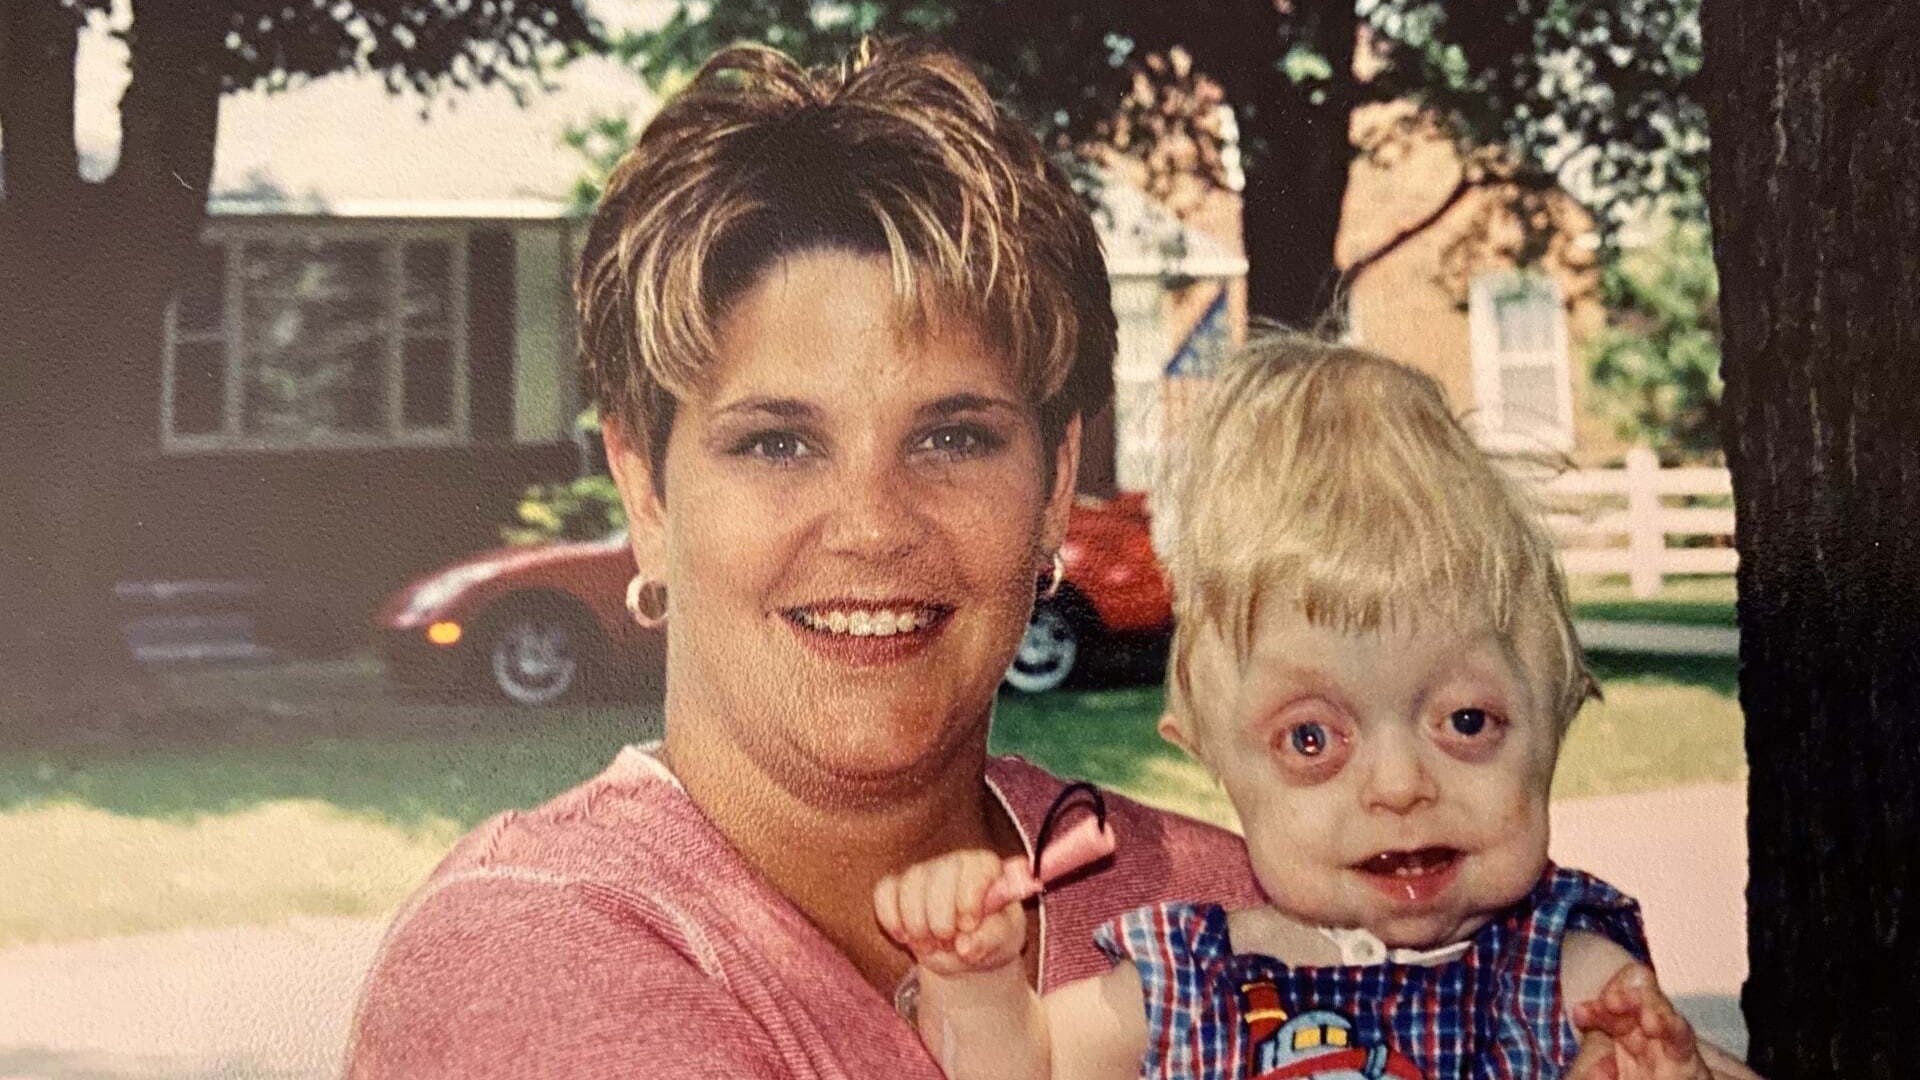 Braden West was never supposed to live past 18 months, let alone 18 years. Braden was diagnosed with Pfeiffer syndrome, a rare cranio-facial condition.